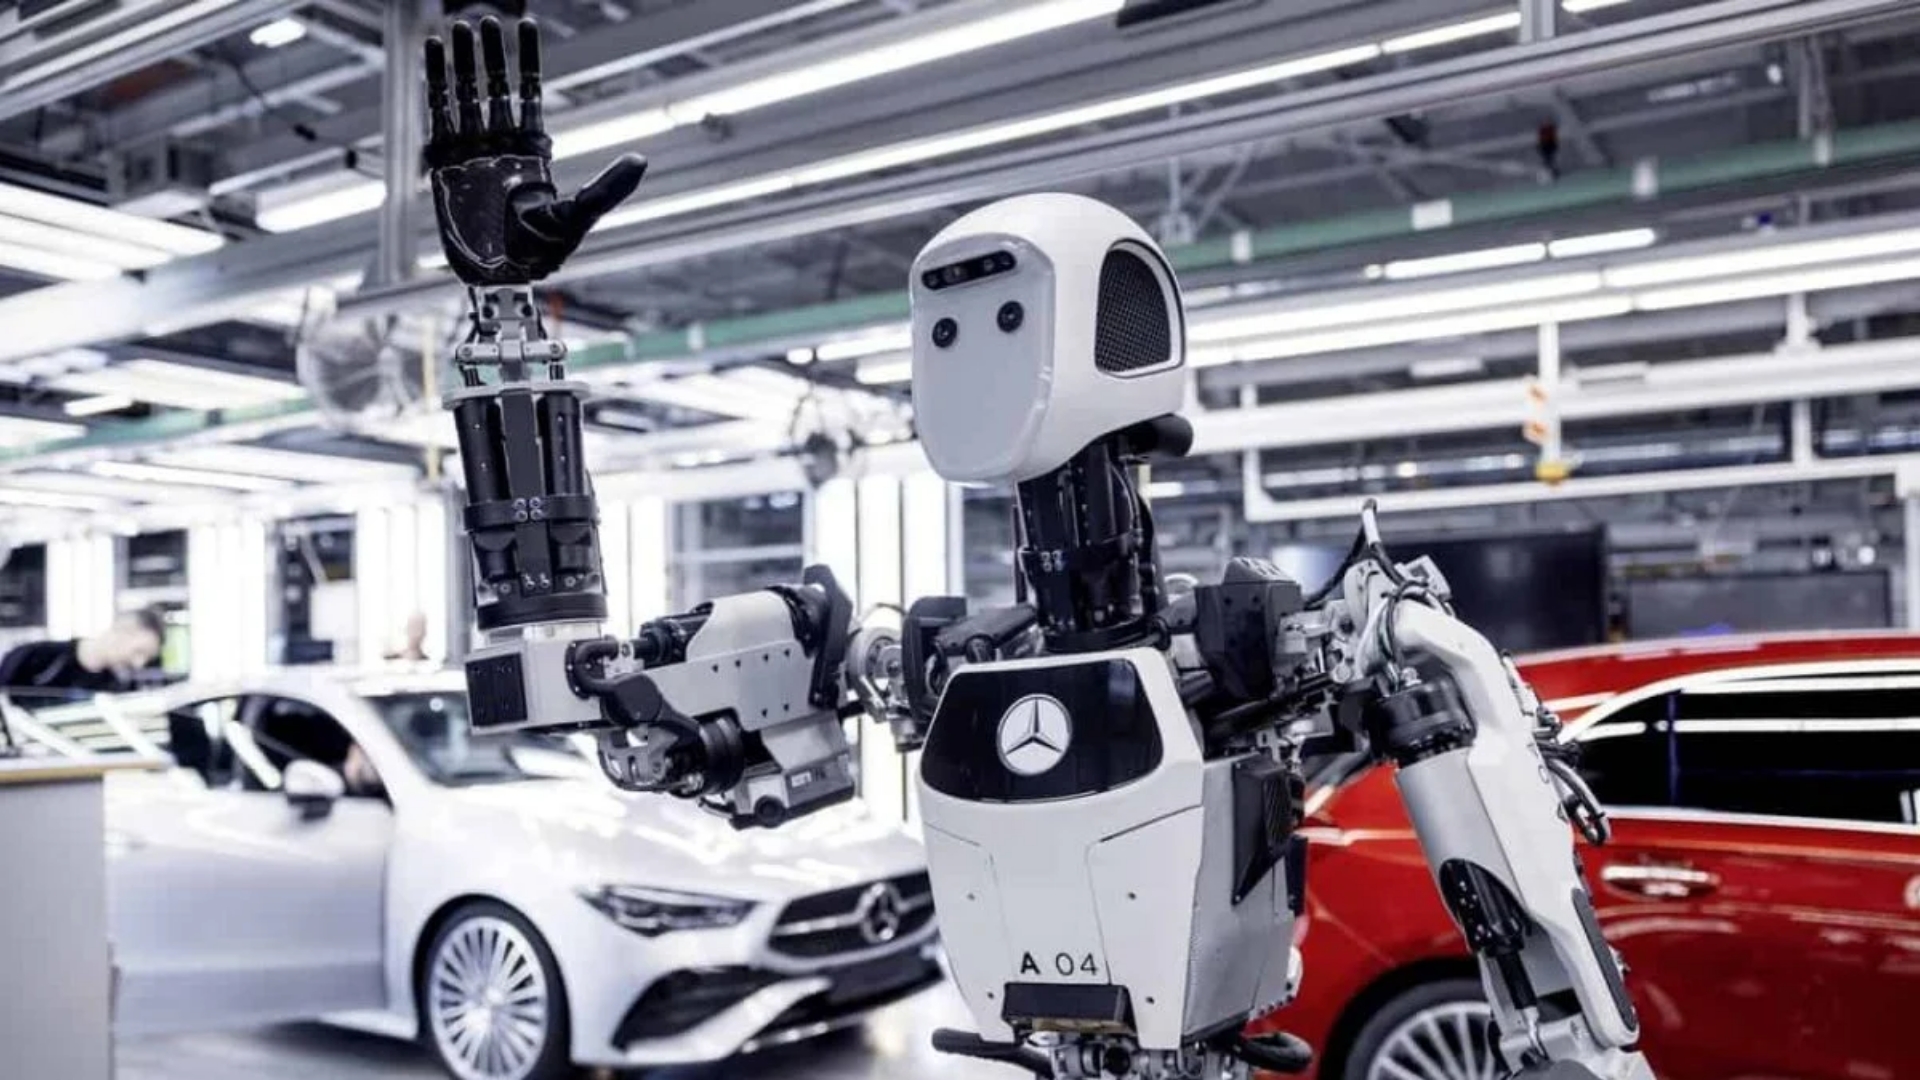 Humanoid robots are being used by Mercedes-Benz to replace low-skill manual labor in industries.